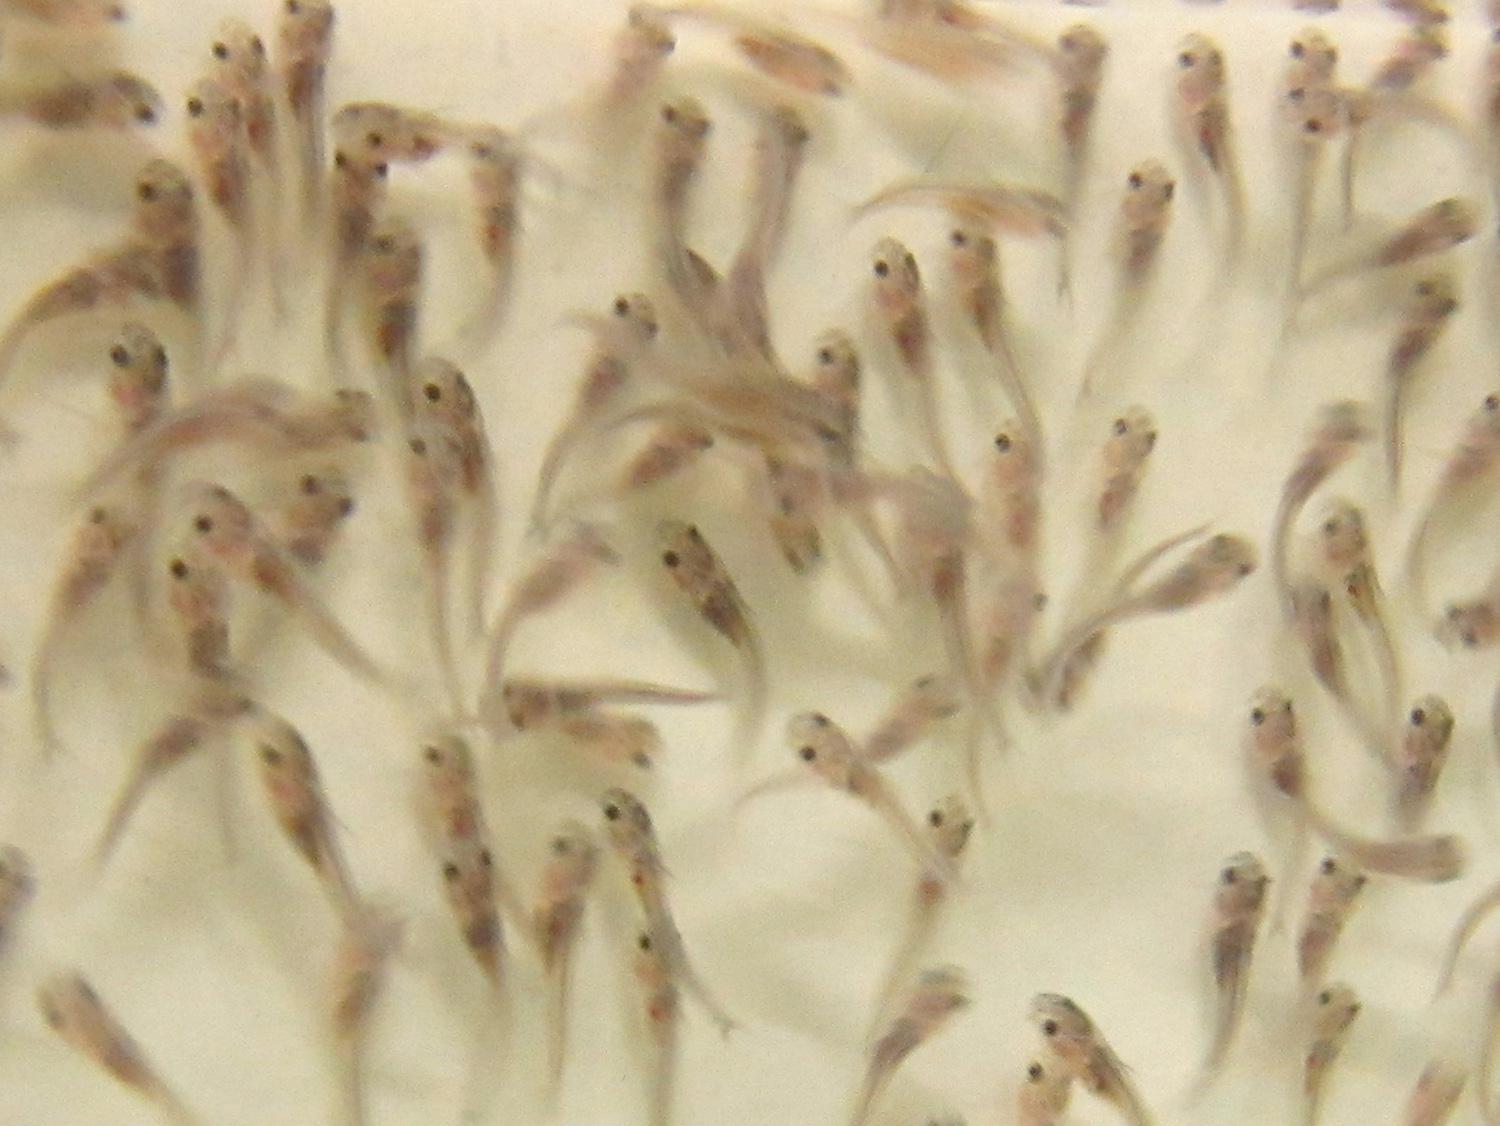 These 2012 catfish fry at the Mississippi State University College of Veterinary Medicine are similar to young fish that have been delayed by this spring's cool temperatures, which have slowed growth of Mississippi's farm-raised catfish and delayed the start of hatchery season. (Photo by MSU Ag Communications/Kat Lawrence)